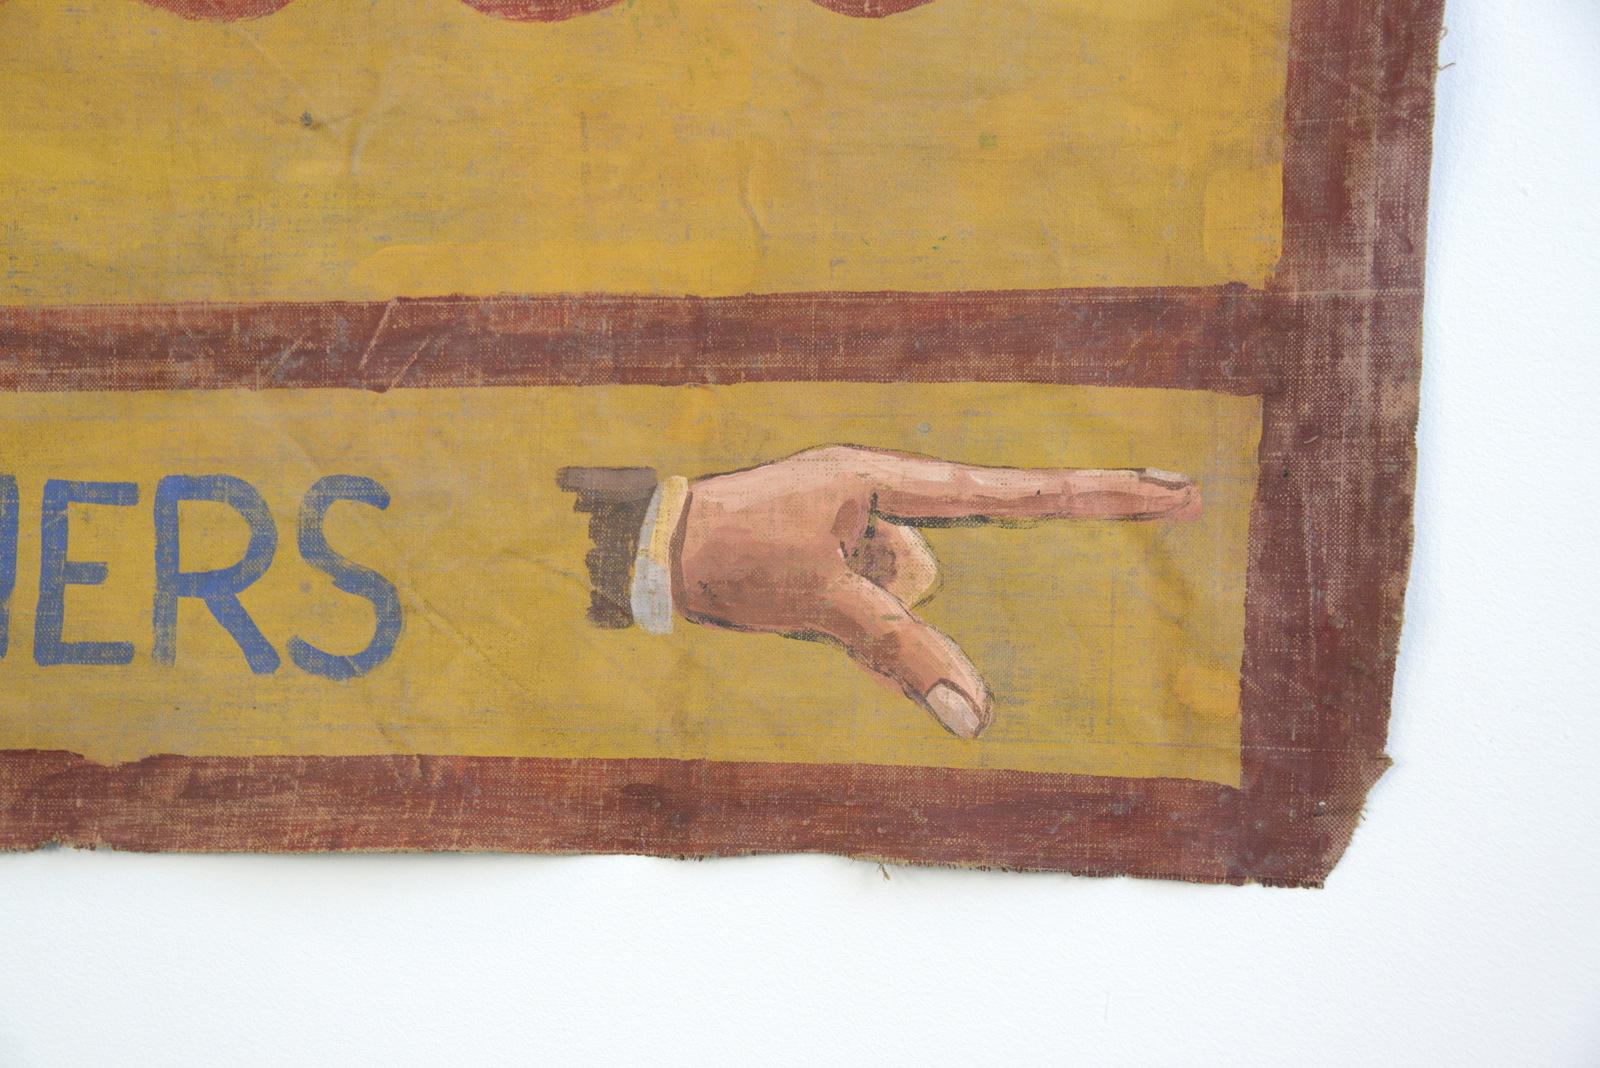 Flea circus canvas banner, circa 1950s

- Hand painted on heavy canvas
- English, 1950s
- Measures: 212 cm wide x 85 cm tall

Condition report

Some age marks and loose threads on a couple of edges.